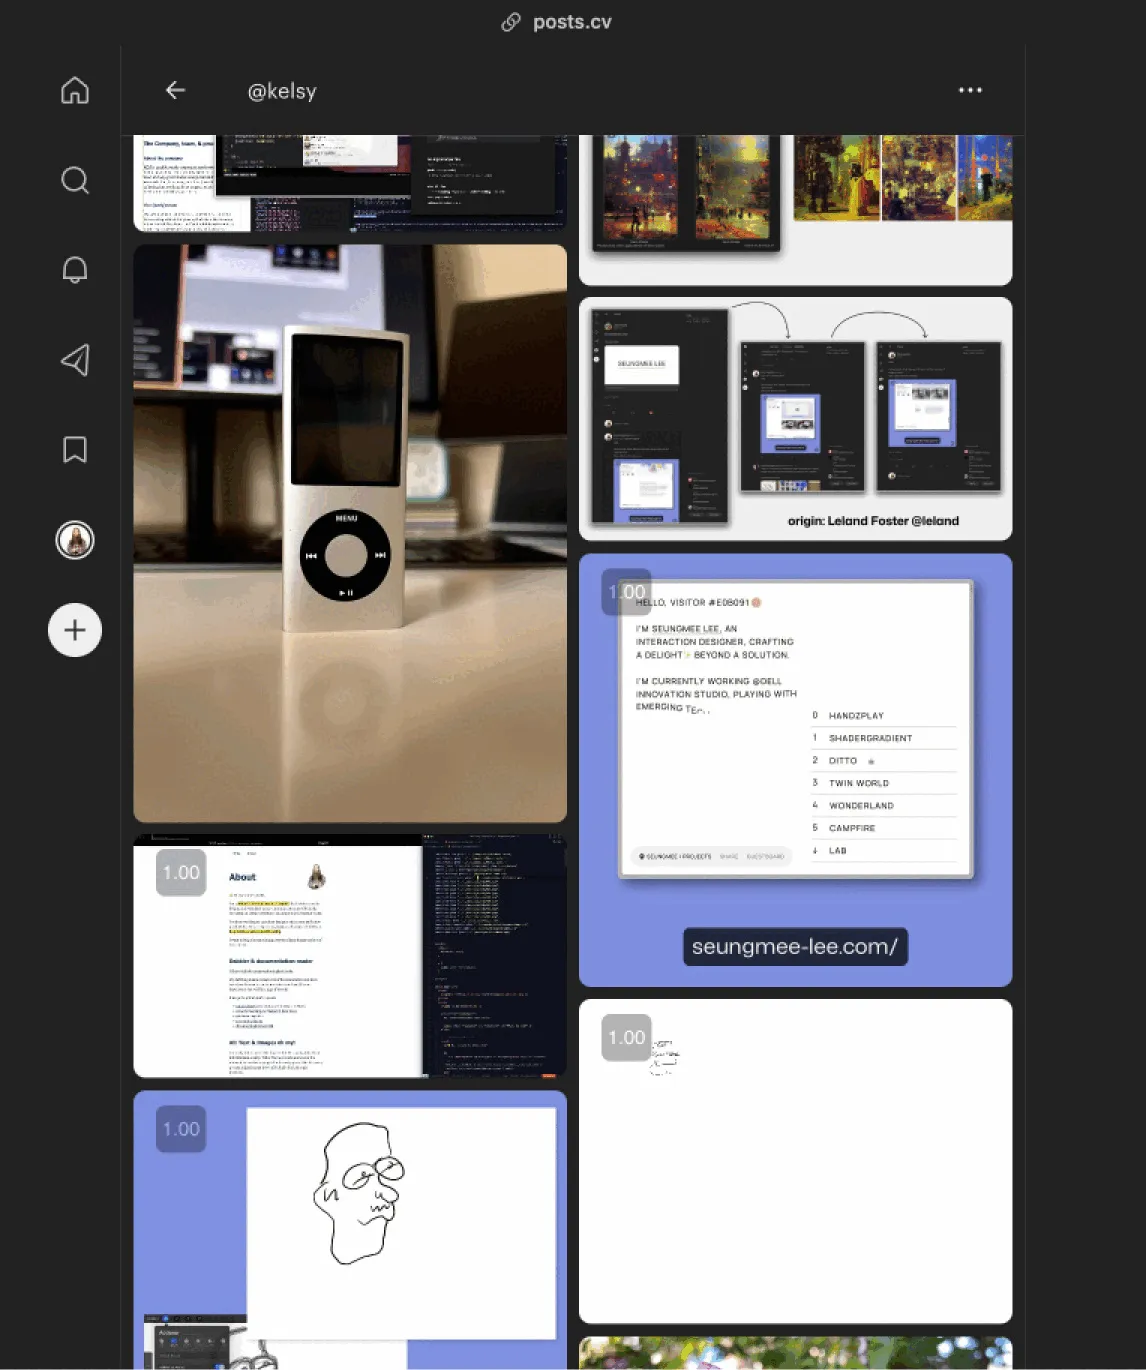 Screenshot of a creative professional's social media profile on posts.cv, featuring a collection of posts. The top post displays a classic iPod device on a wooden surface. Below are images showcasing user interface designs and digital sketches. One post includes a side-by-side comparison of website code and a rendered webpage. Another post features a simple line drawing of a face. The overall theme suggests a portfolio of design and development work.